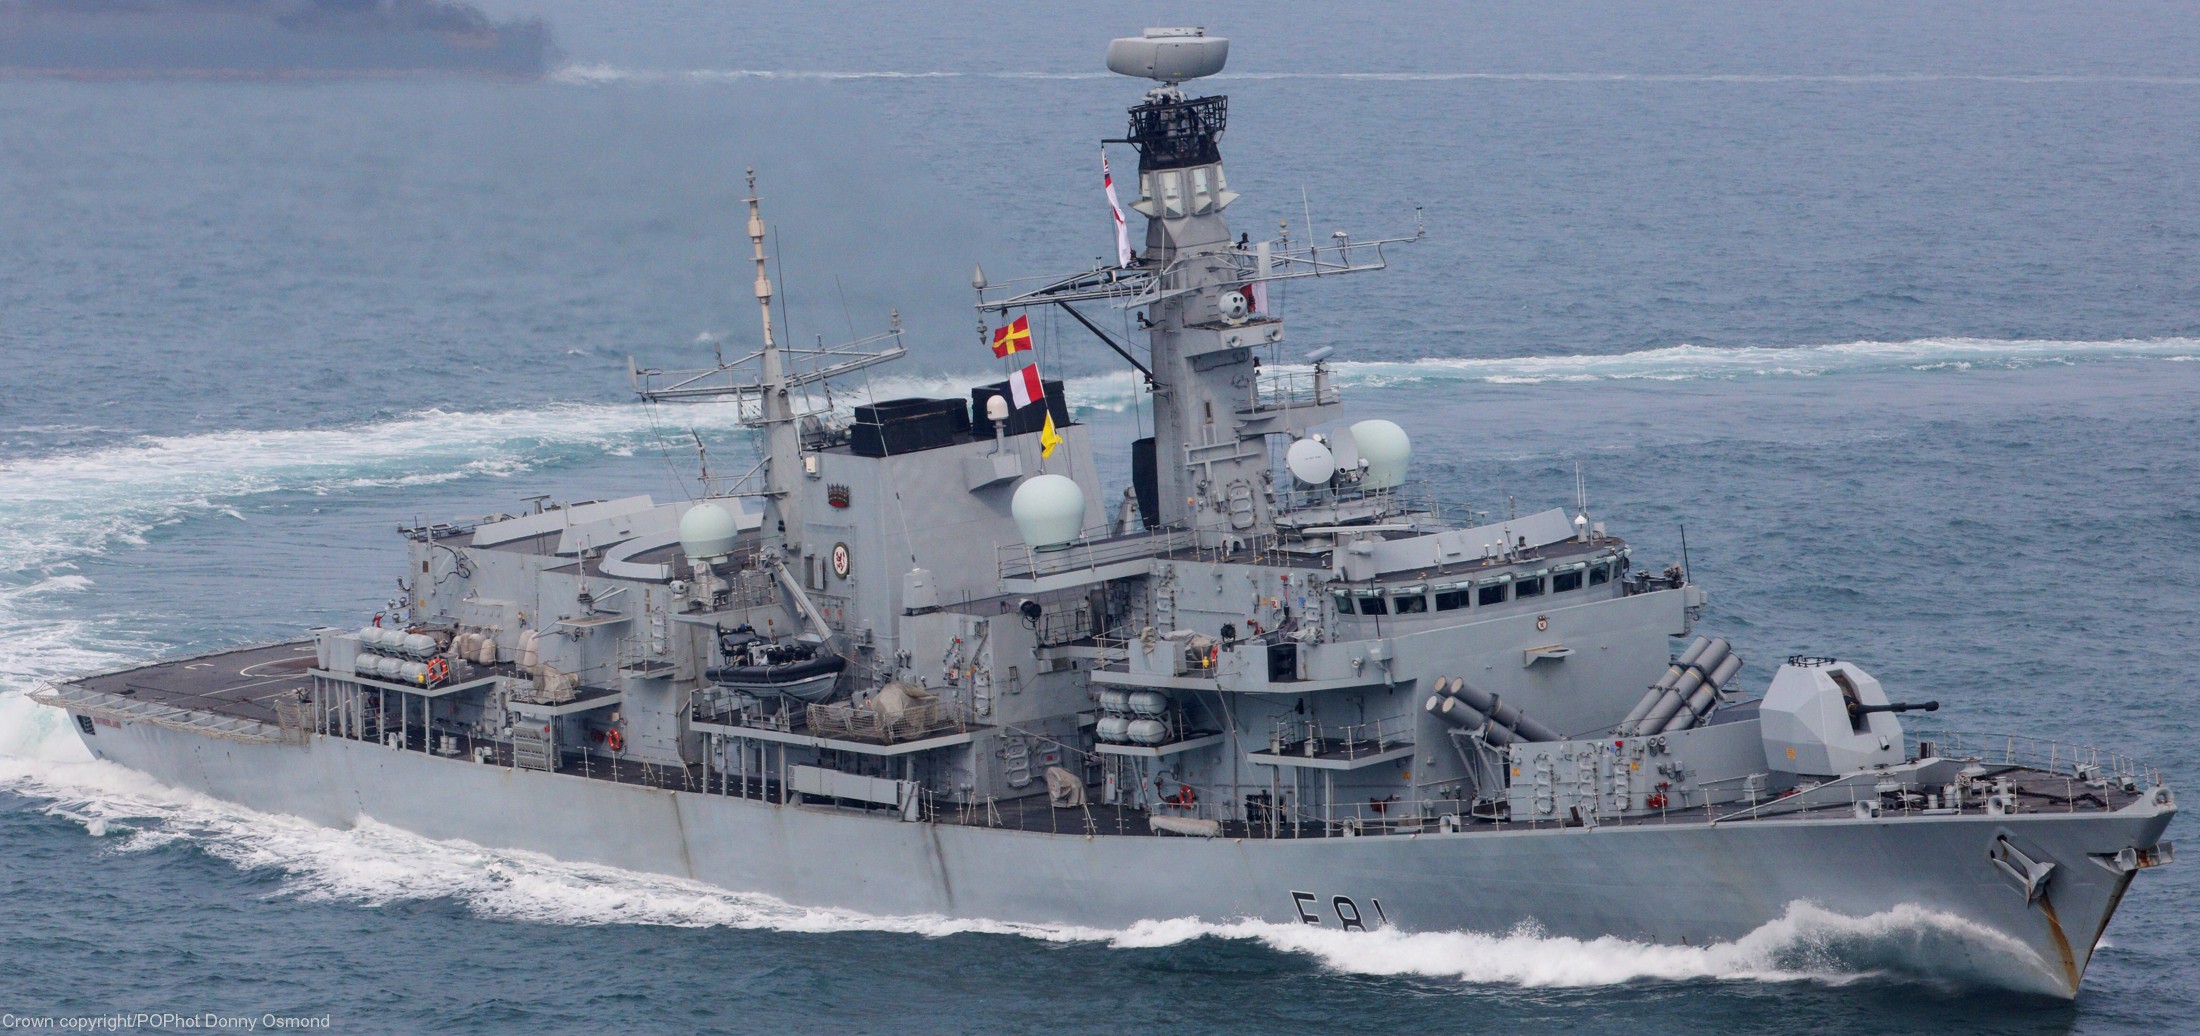 f-81 hms sutherland type 23 duke class guided missile frigate ffg royal navy 10